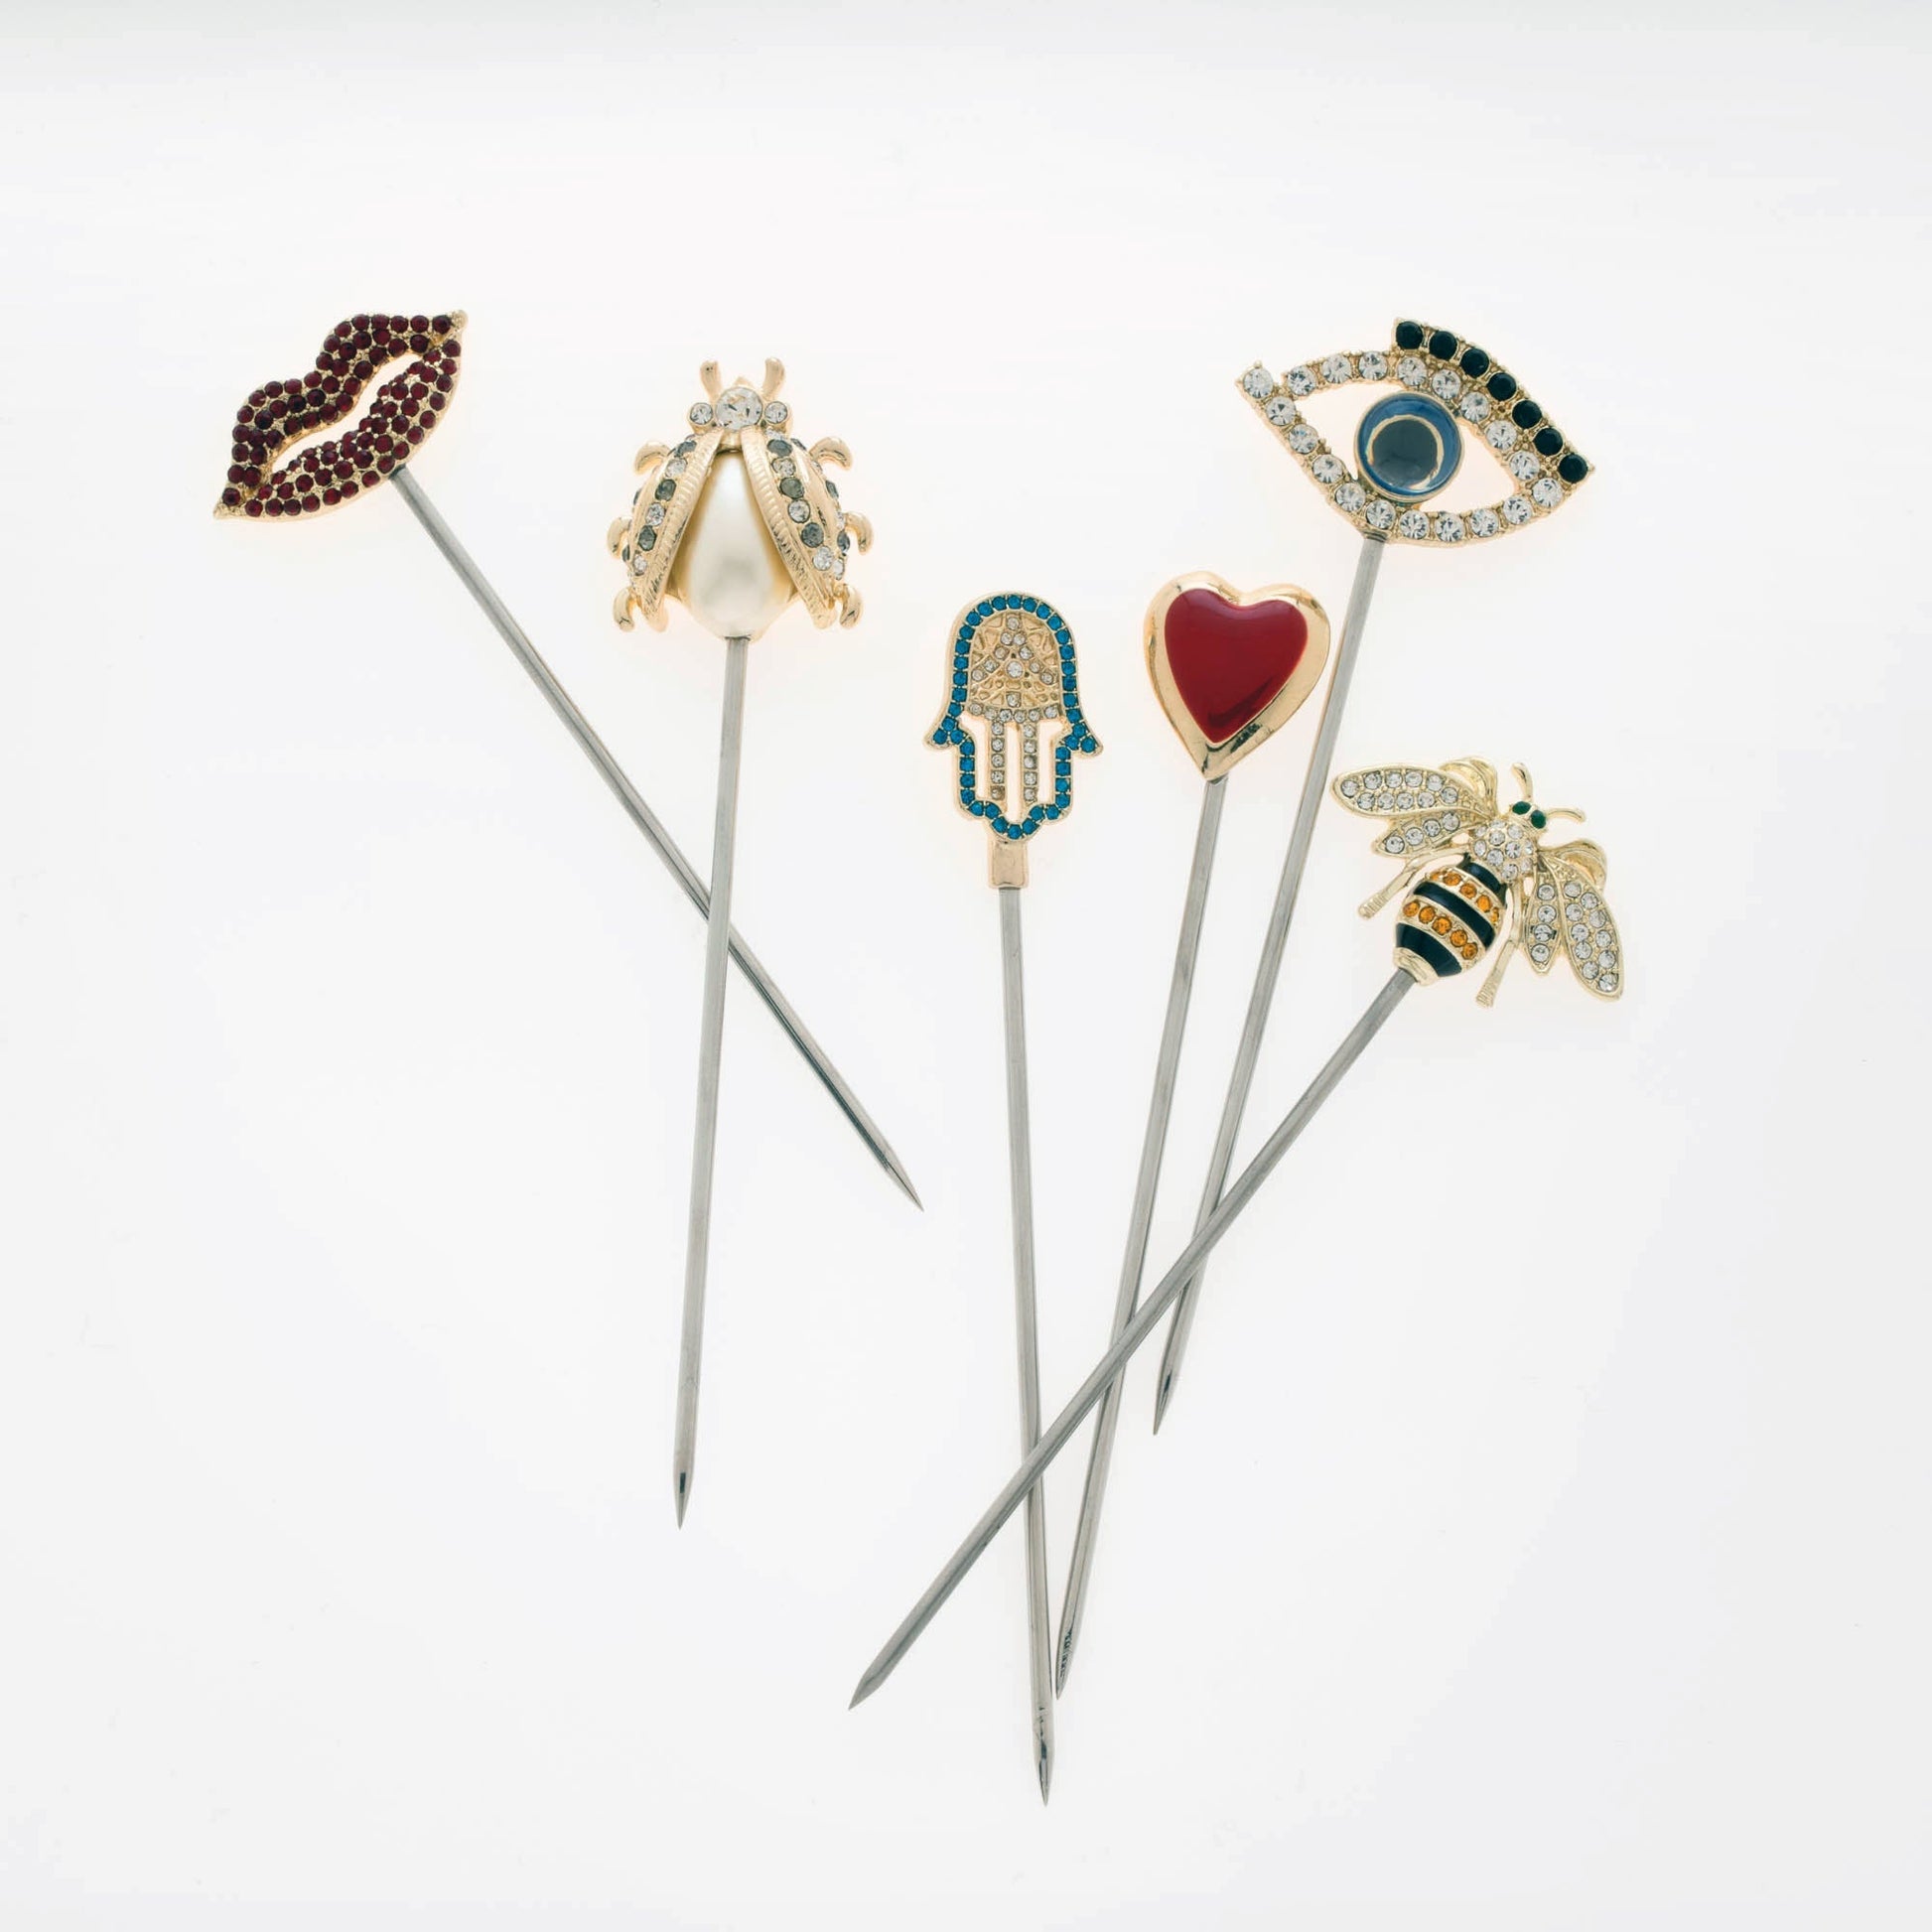 Lucky charm cocktail picks - HOUSE OF SHE